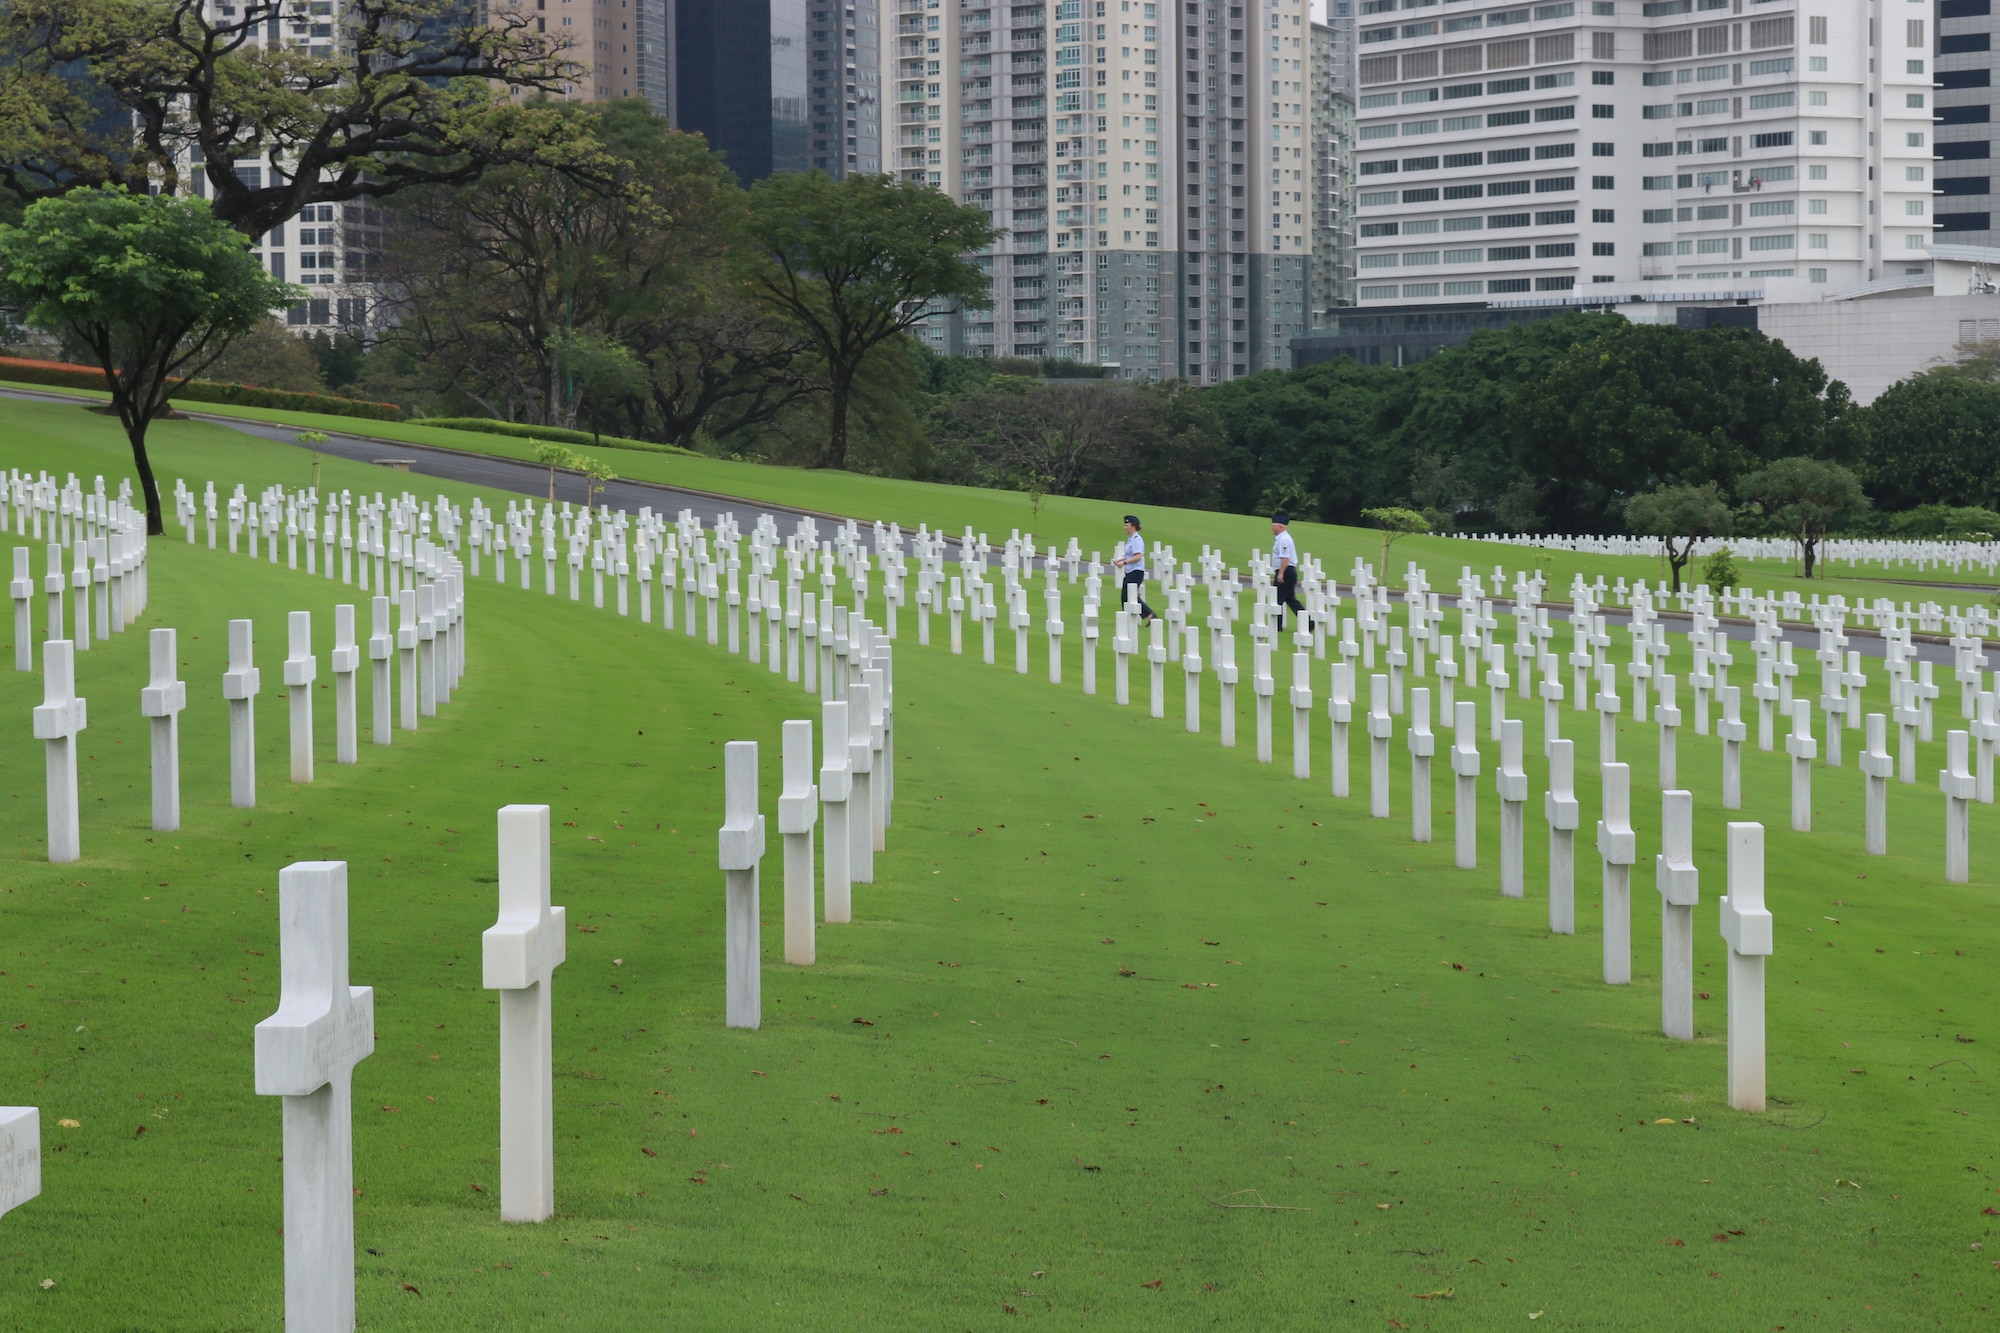 Airmen from Dyess Air Force Base, Texas, walk near the graves of fallen service members at the Manila American Cemetery in Manila, Philippines, Feb. 17, 2020.